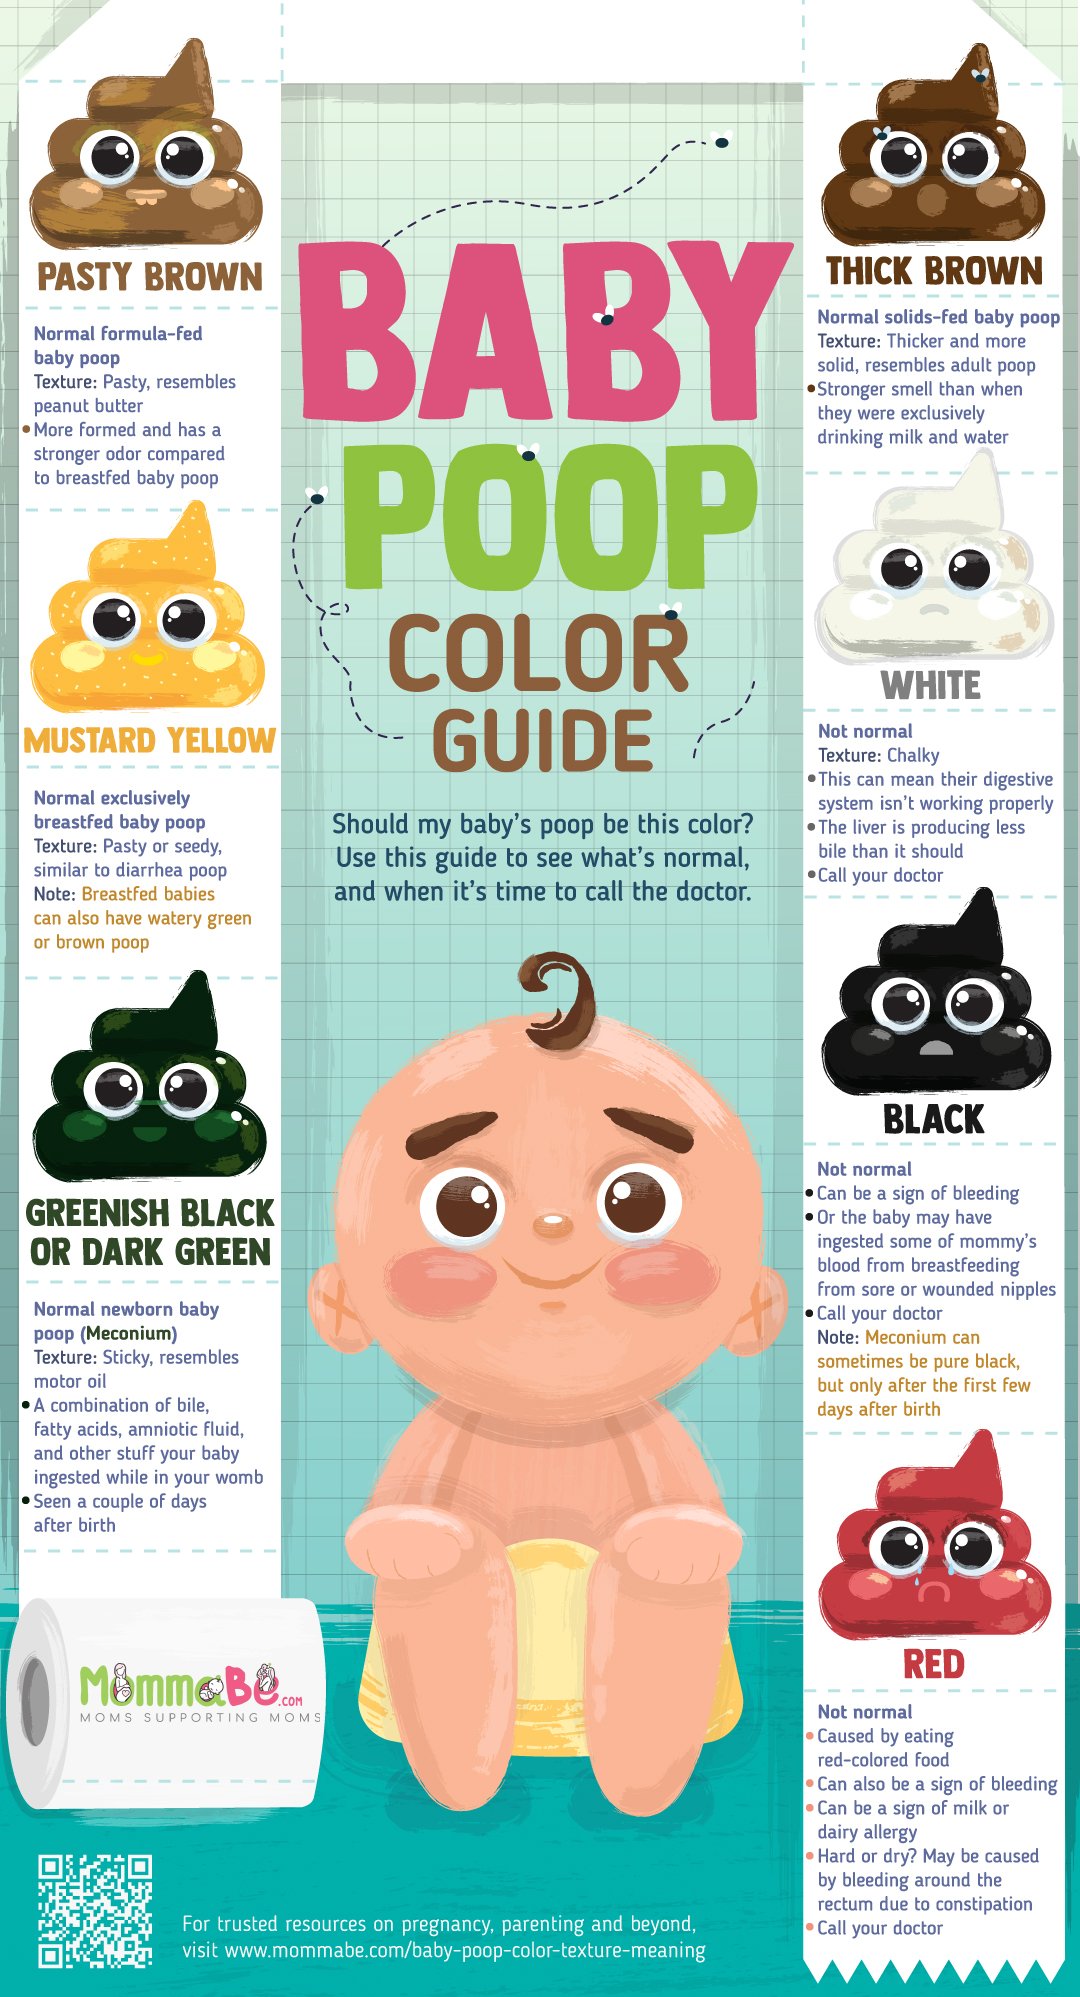 What Does Baby Poop Color And Texture Mean?